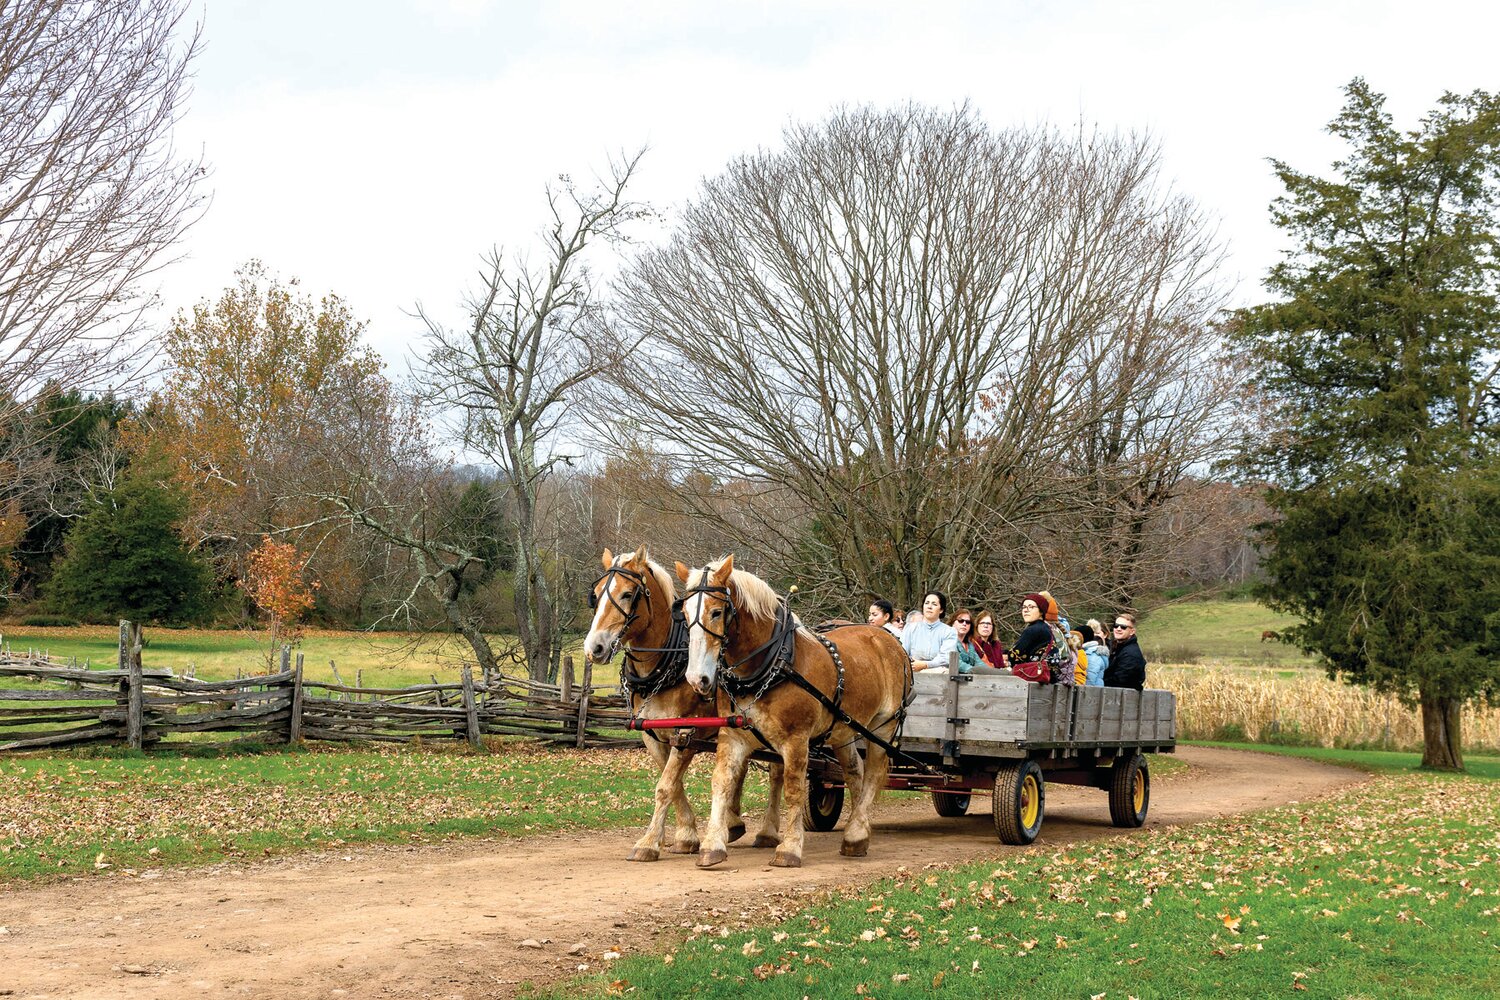 Horses pull a wagon of visitors at Howell Living History Farm on Nov. 4.